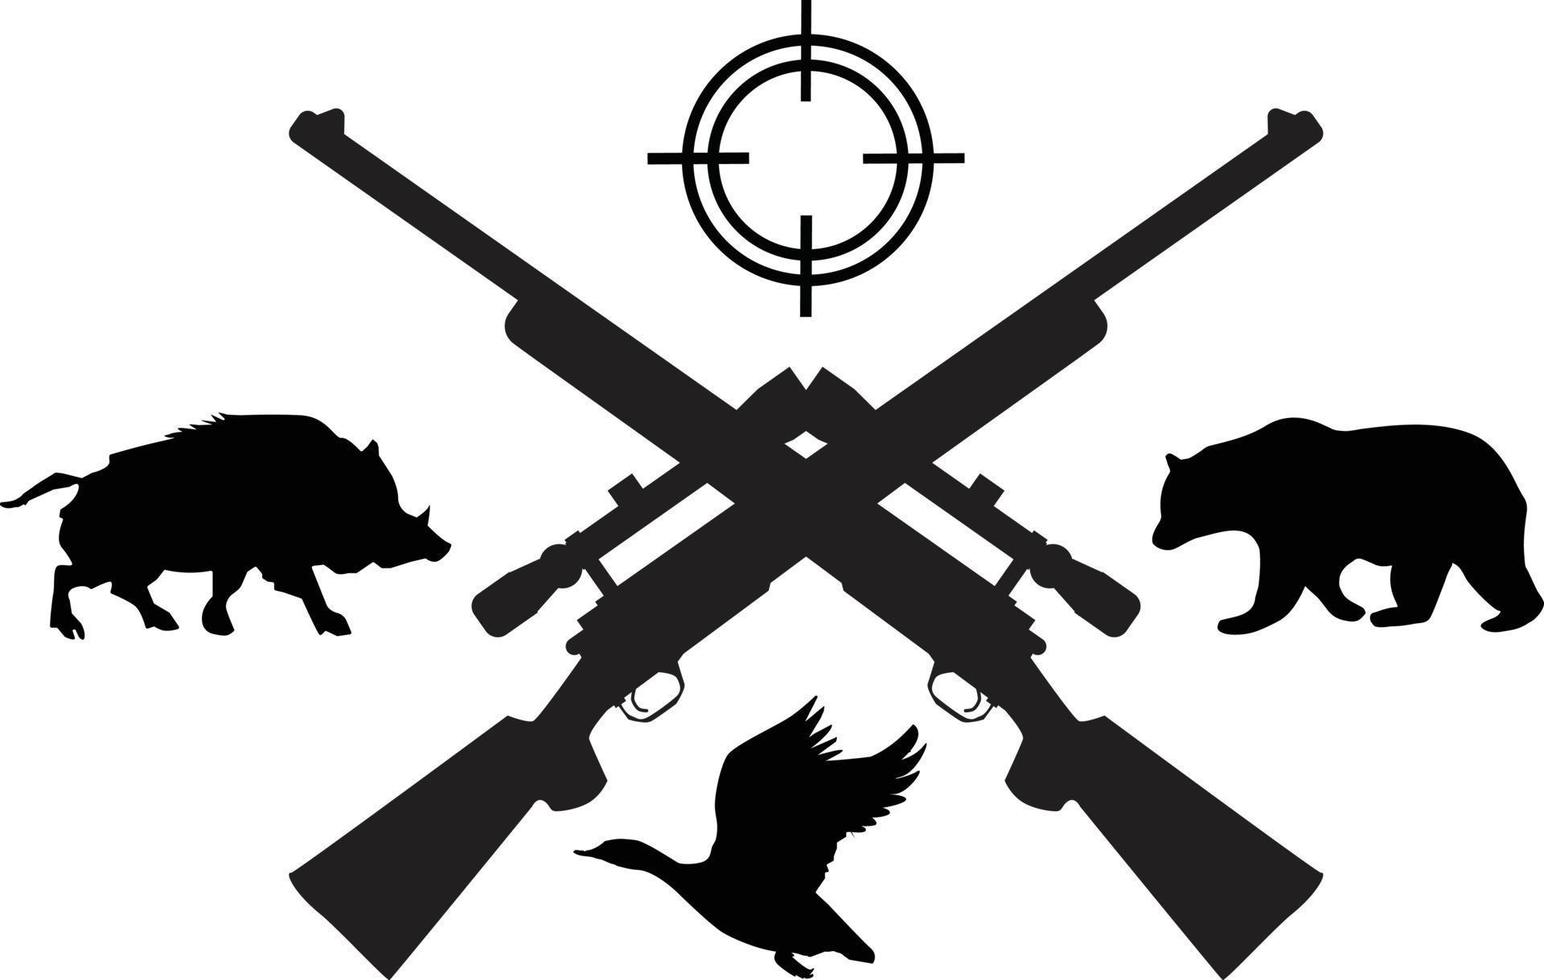 Hunting Vintage icon. Crossed Hunting Rifles, Bear, Duck, Wild Boar Silhouettes. flat style. vector